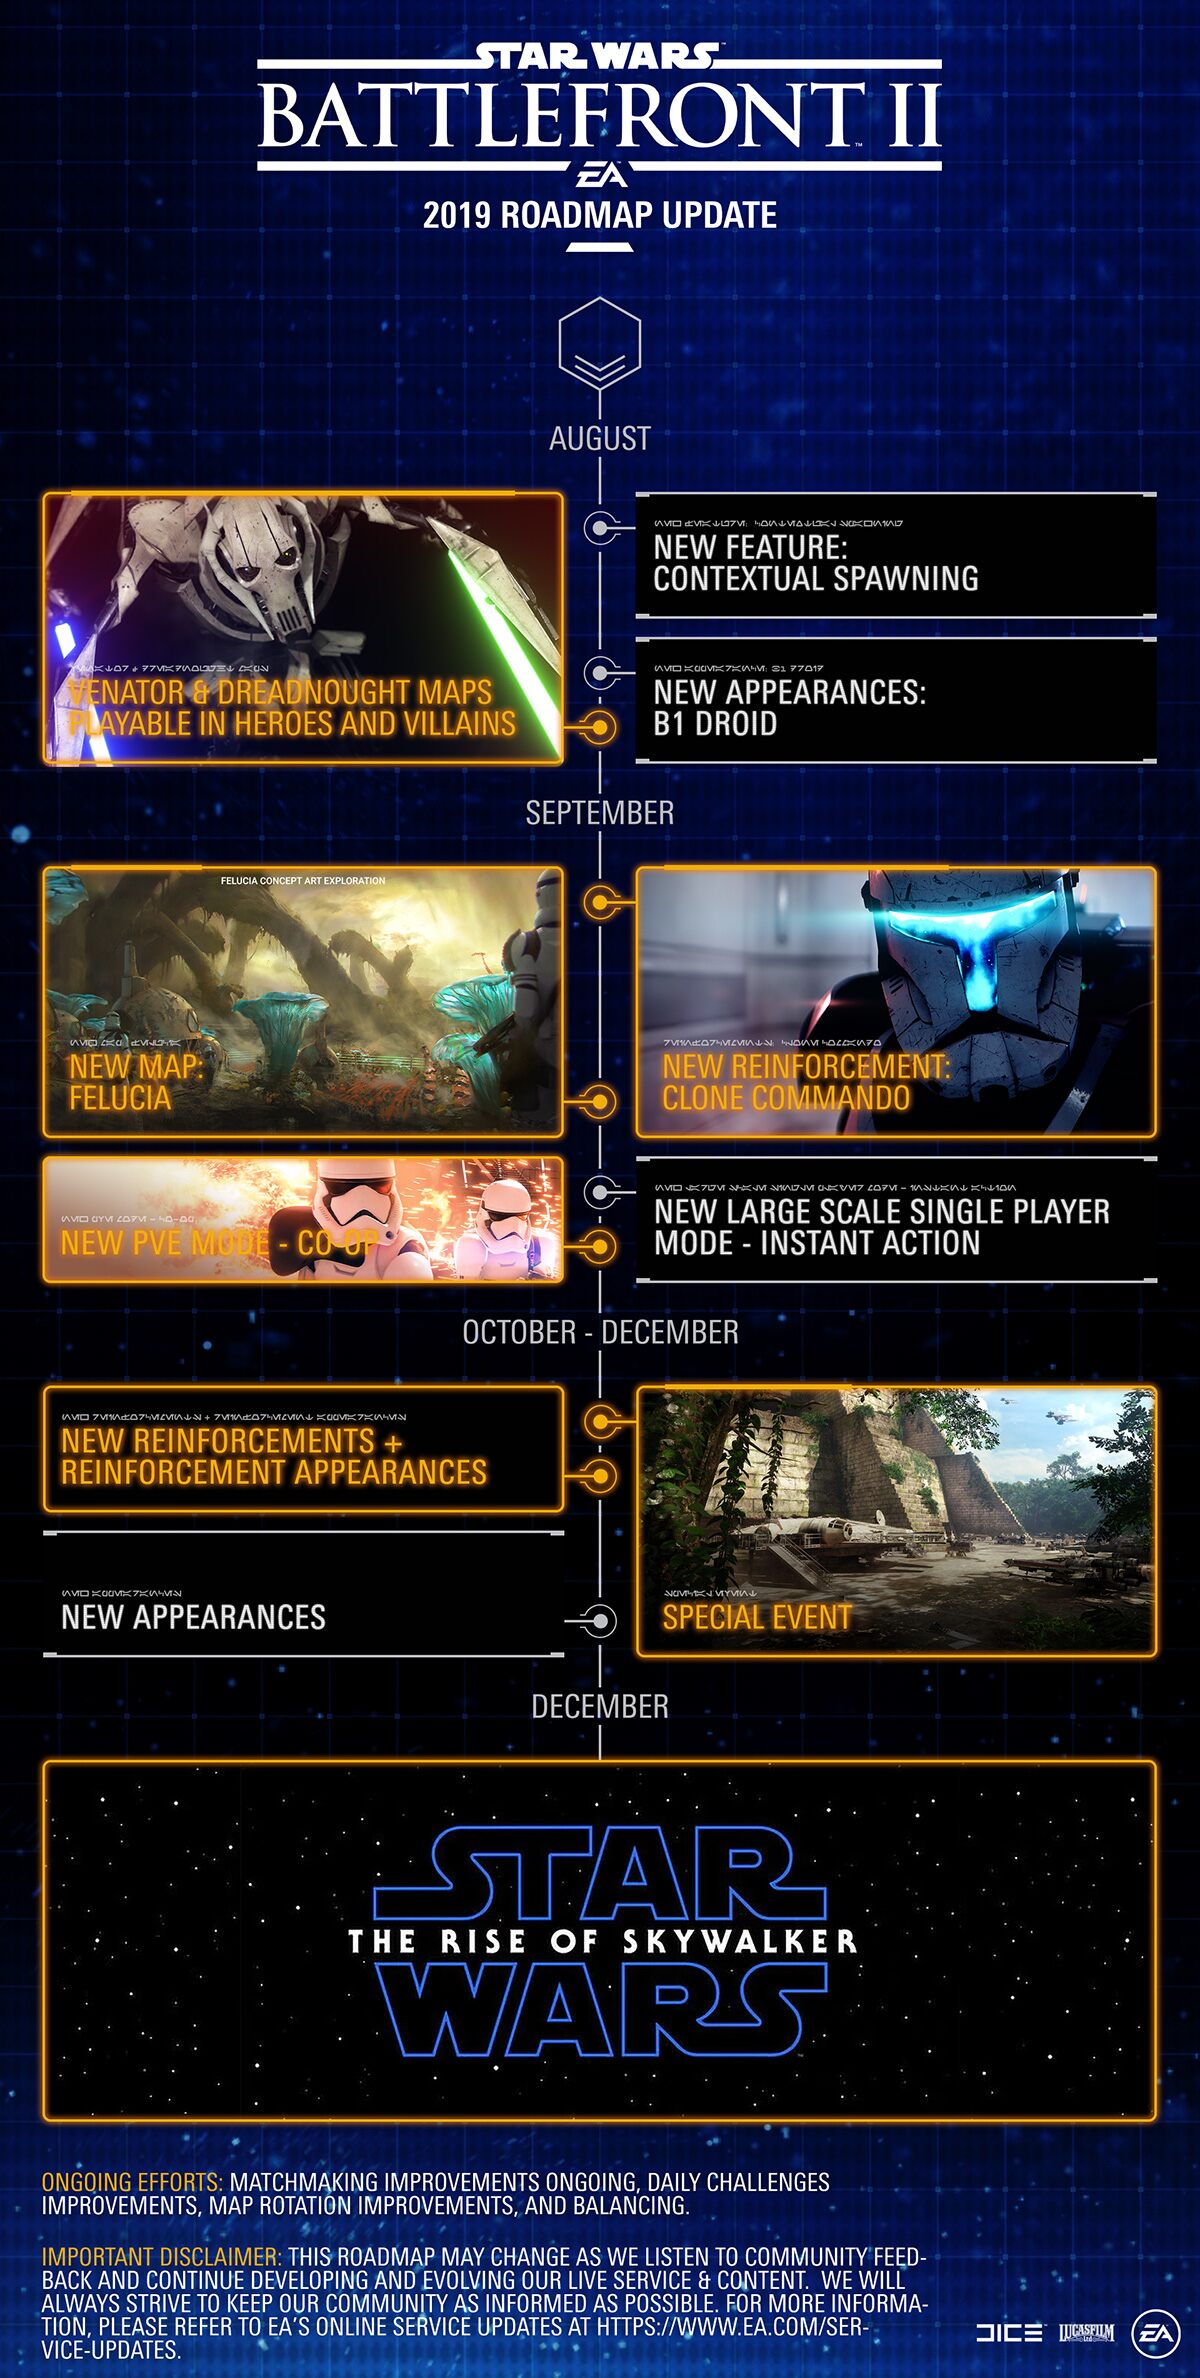 star wars the old republic single player offline